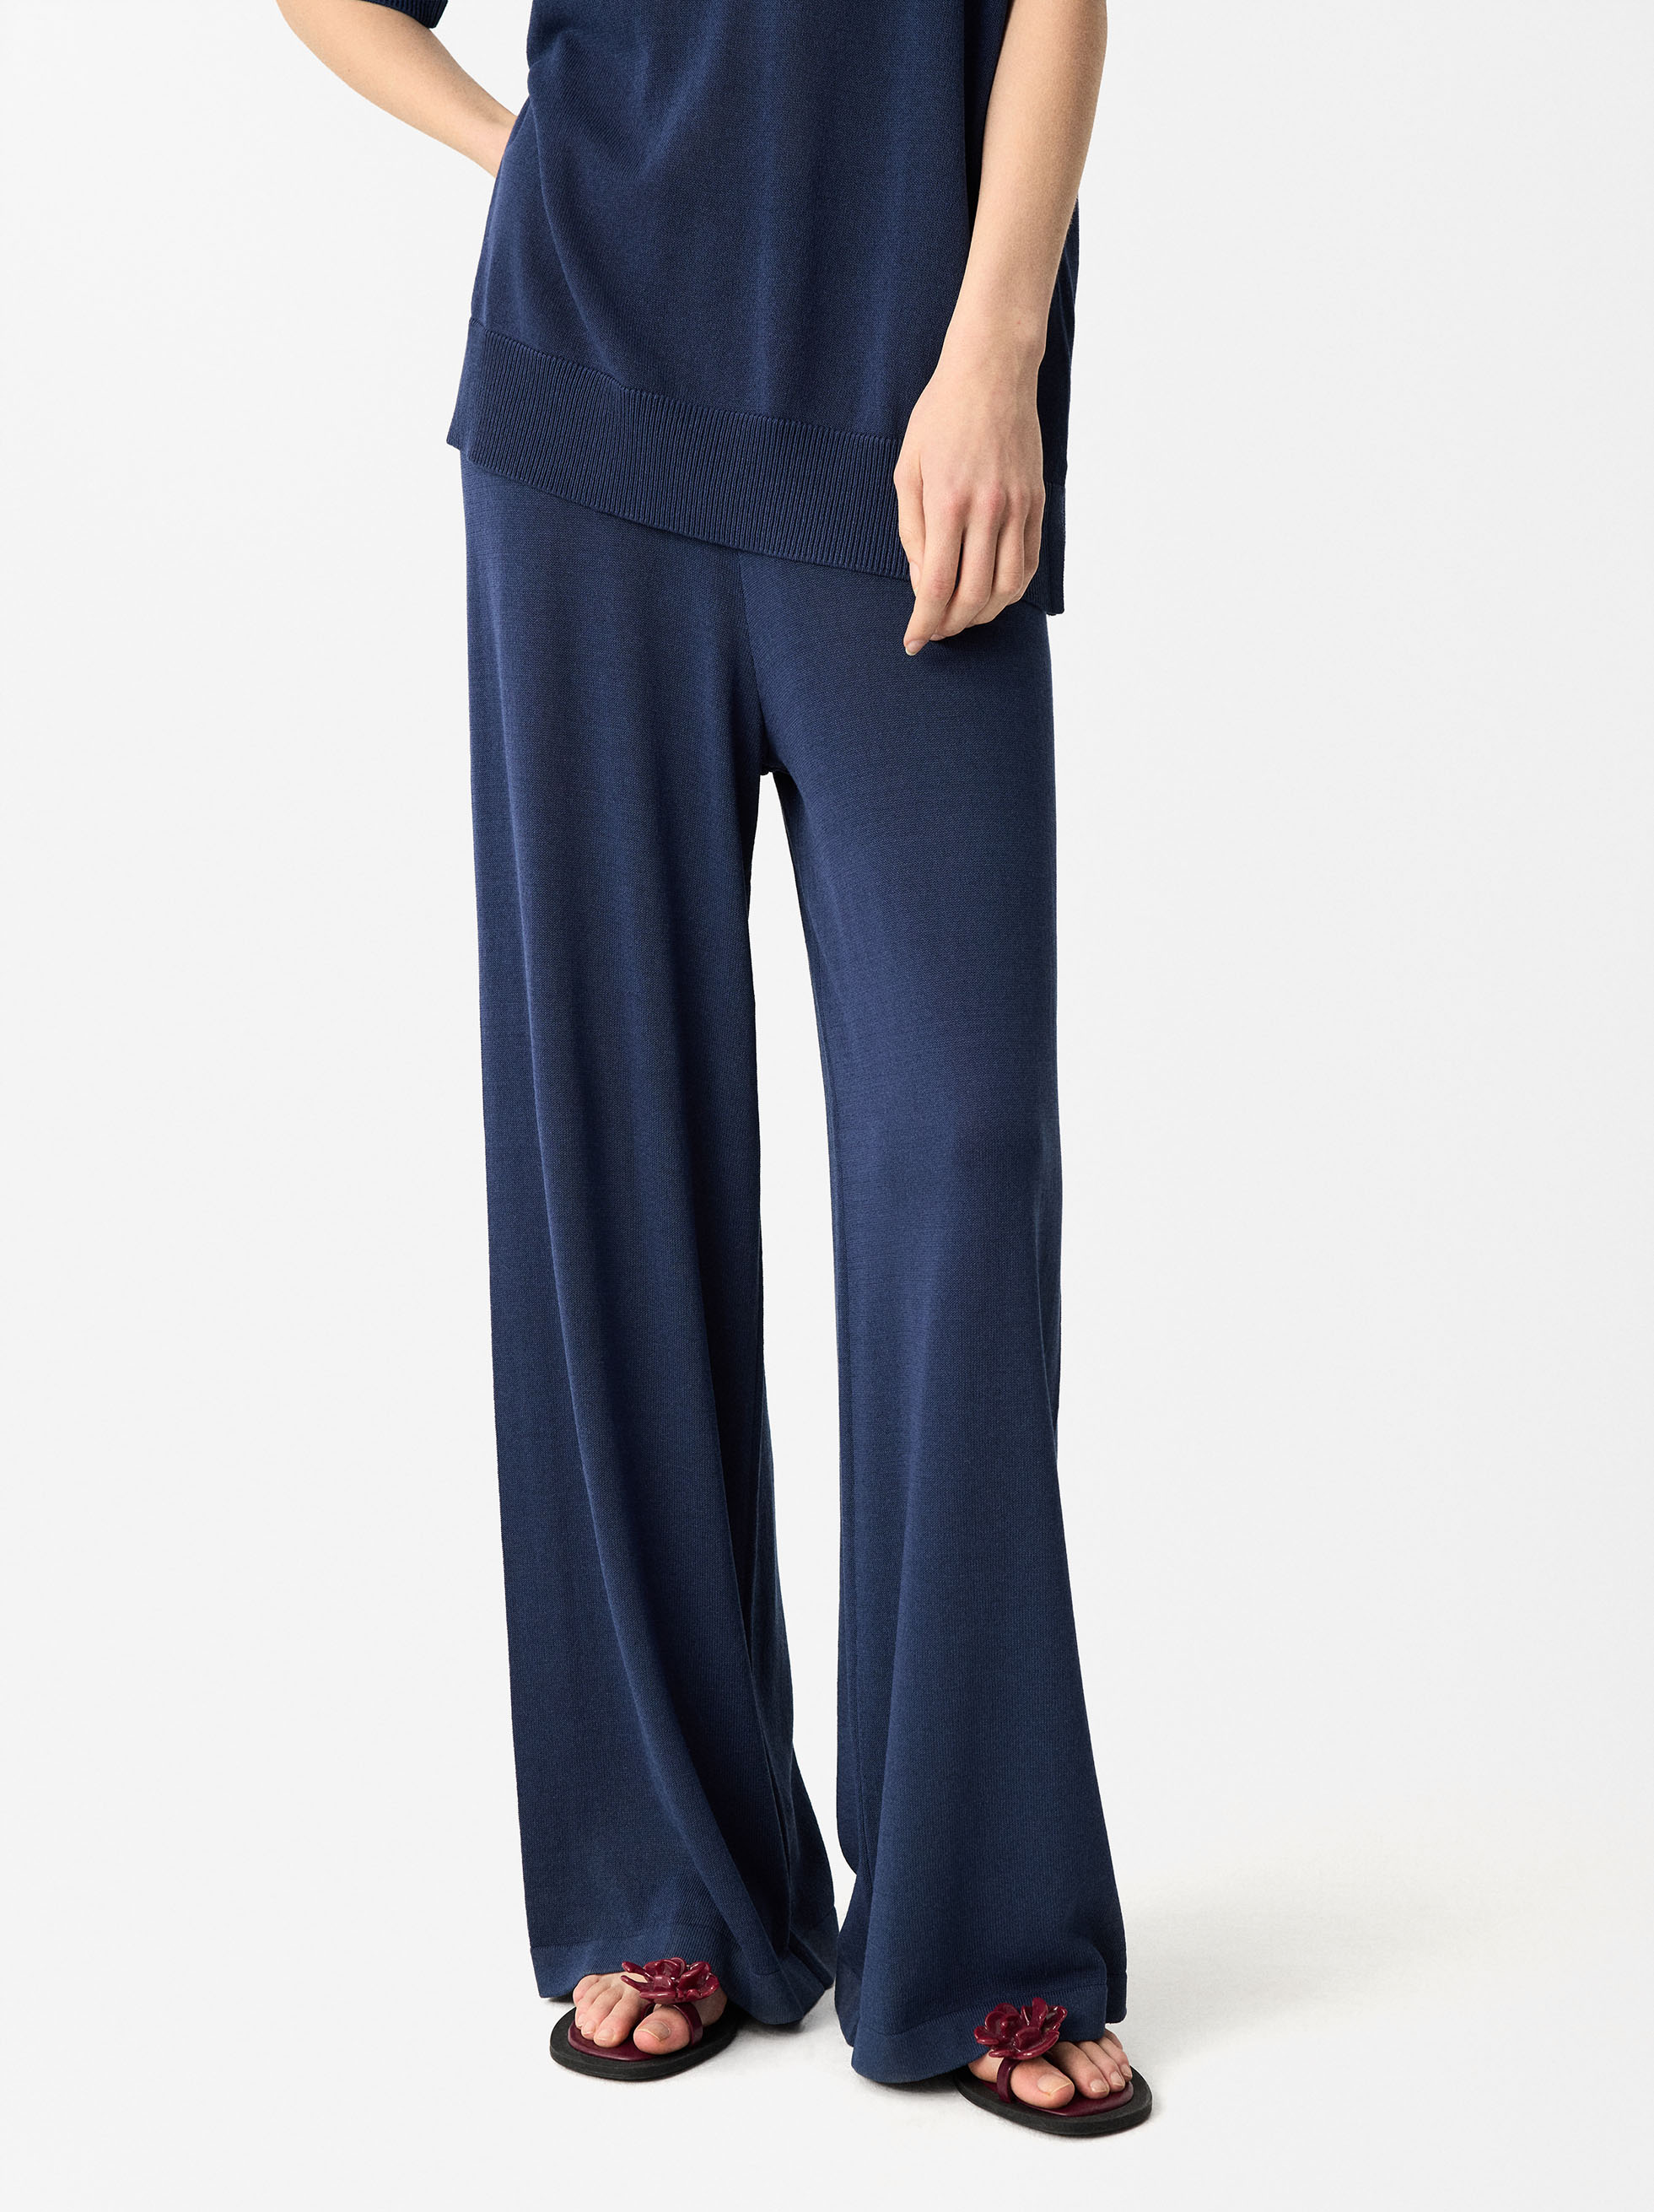 Loose-Fitting Trousers With Elastic Waistband image number 0.0